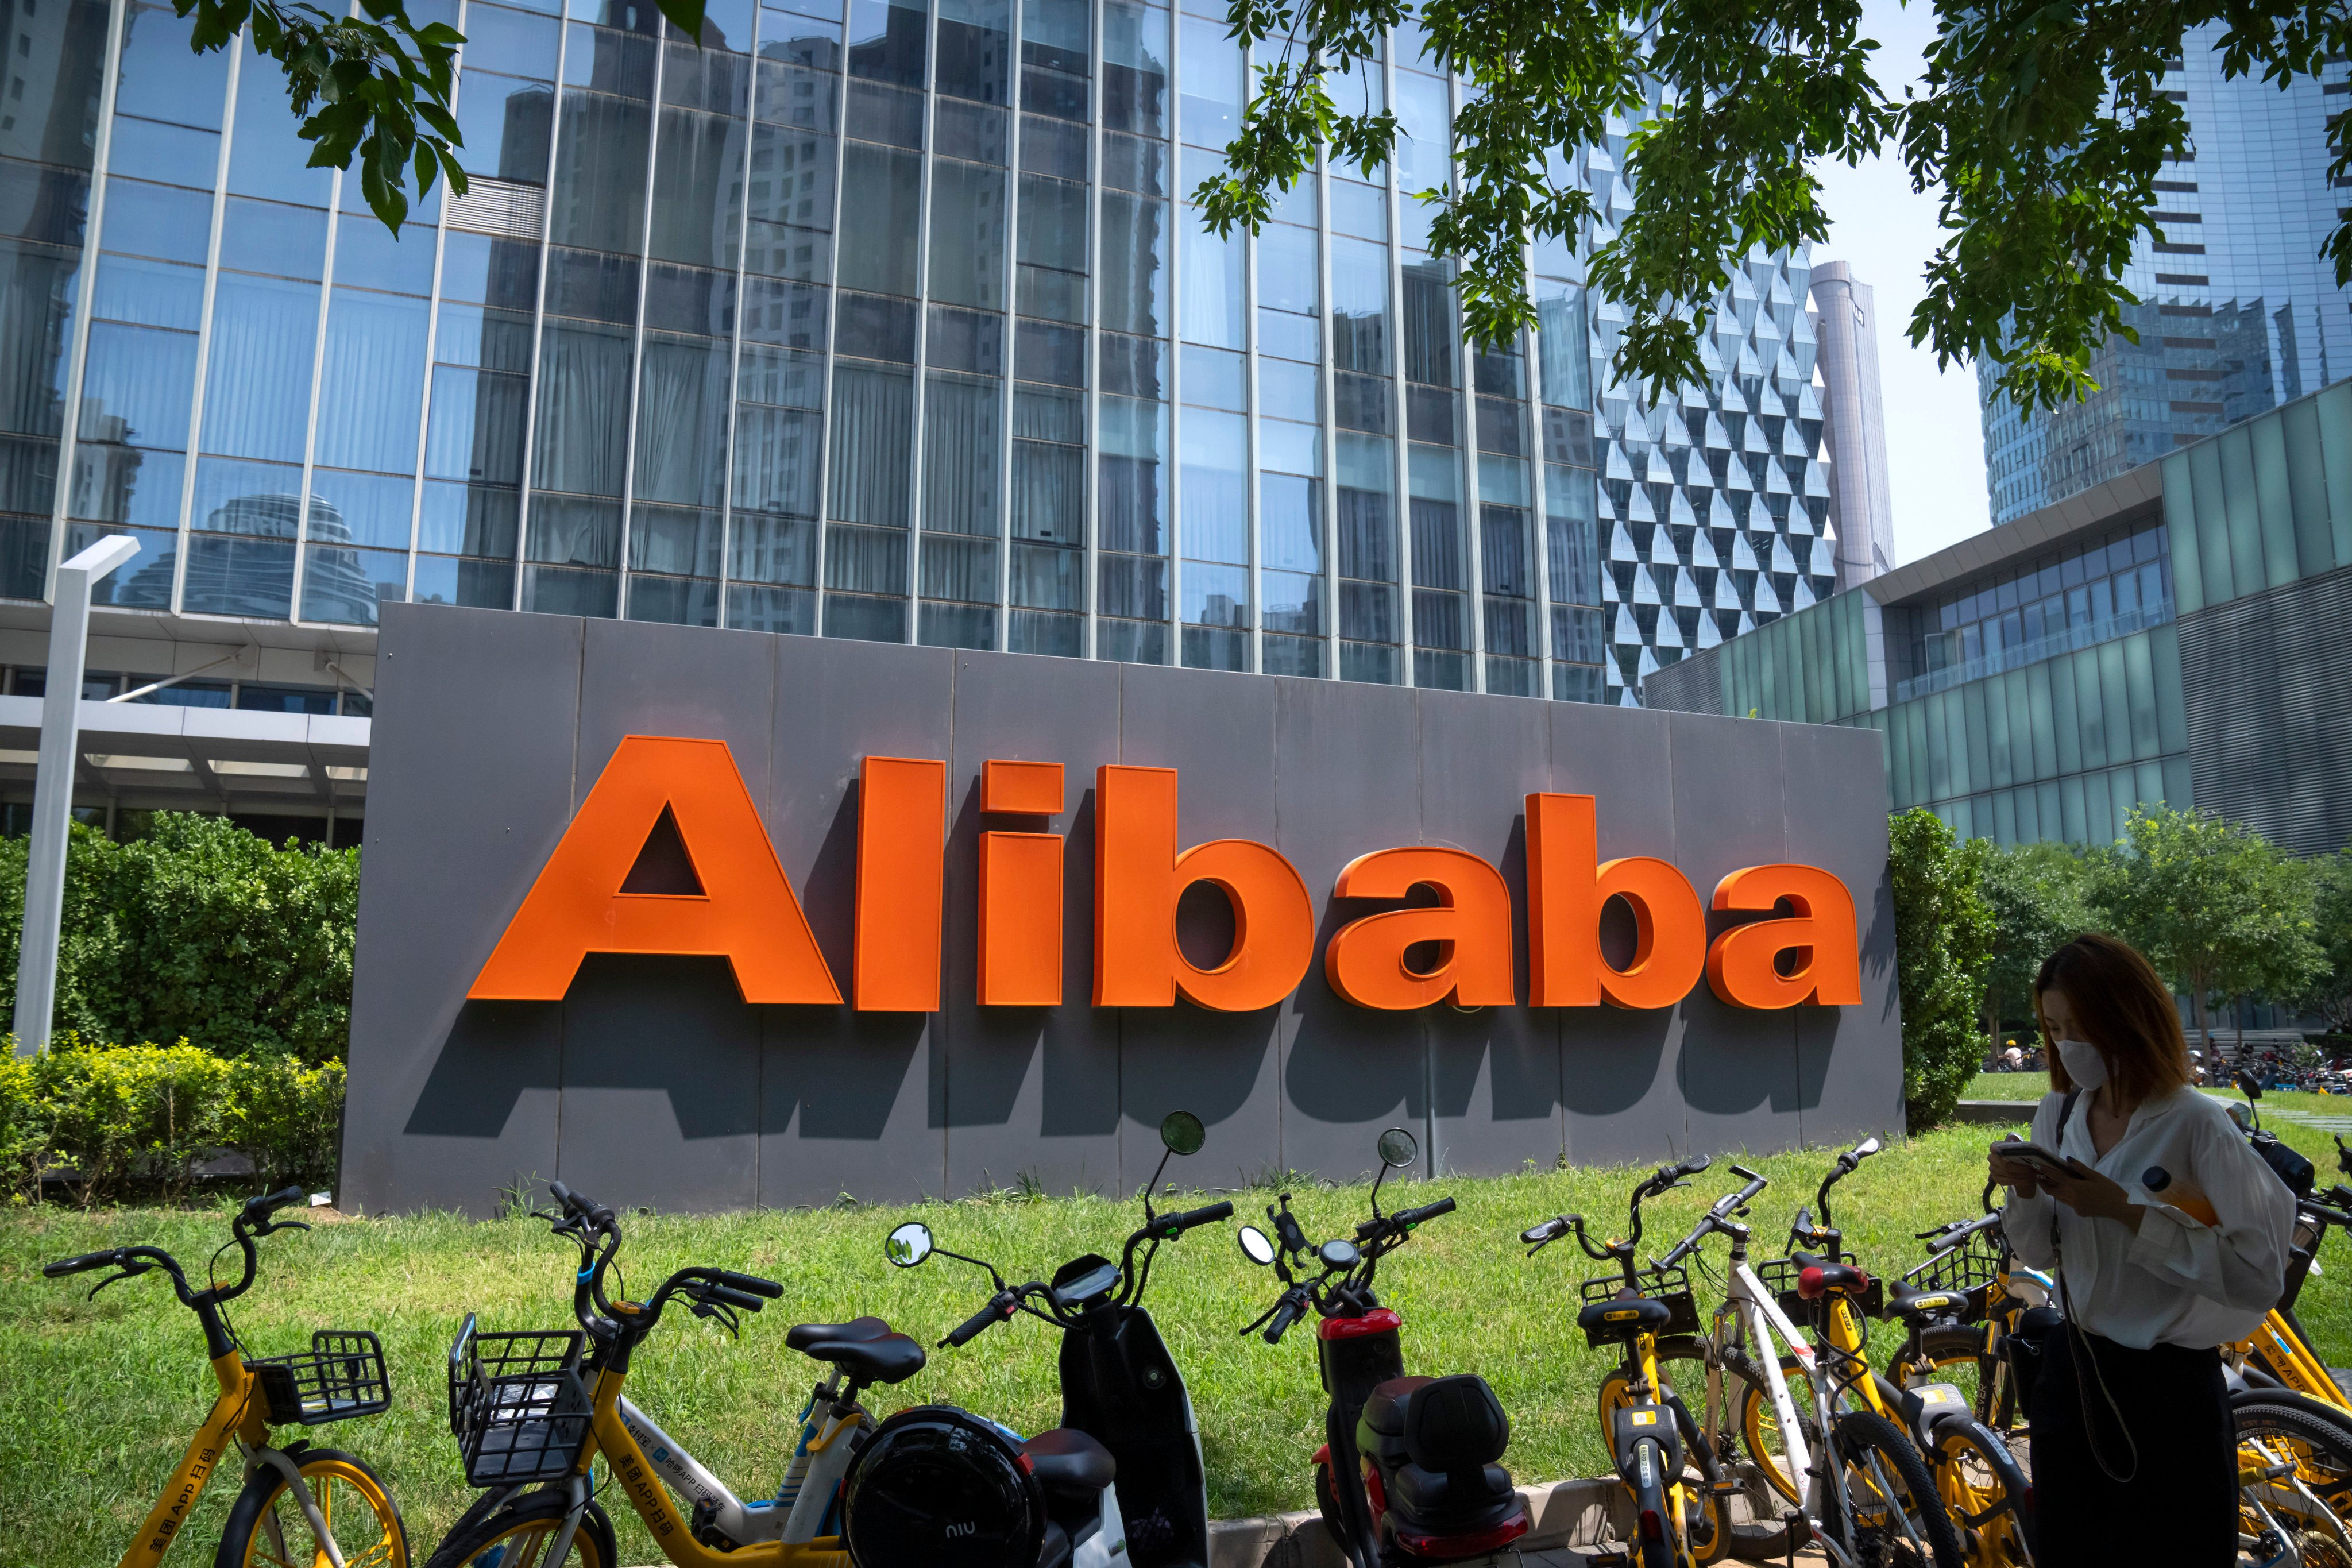 Signage at Alibaba’s office in Beijing on August 10, 2021. Photo: AP